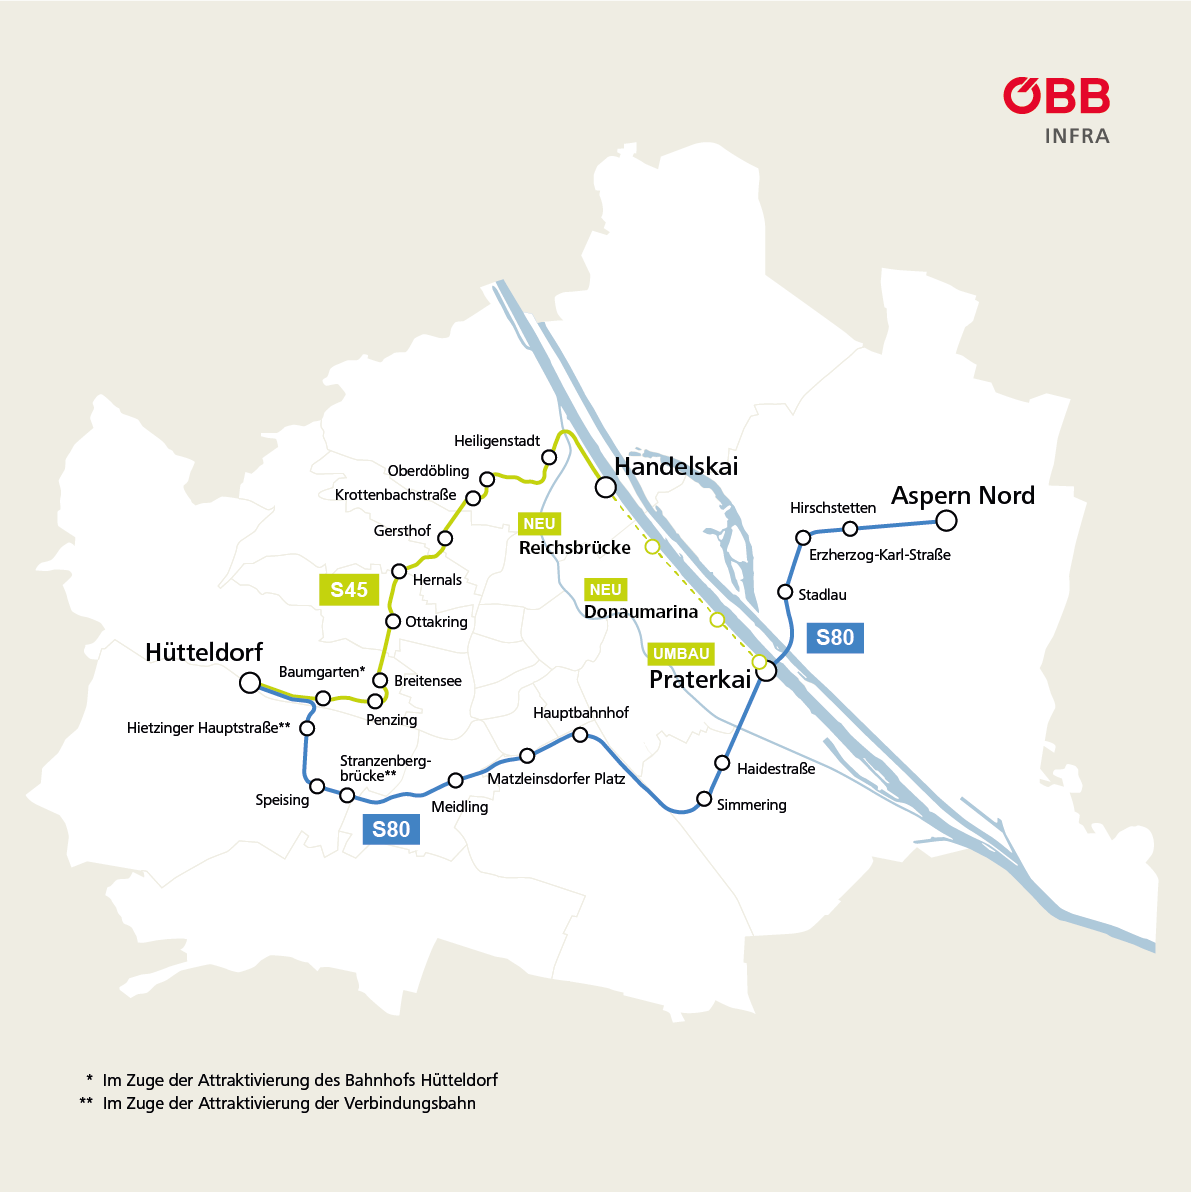 Visualisation of the proposed 2-line S-Bahn ring in Vienna